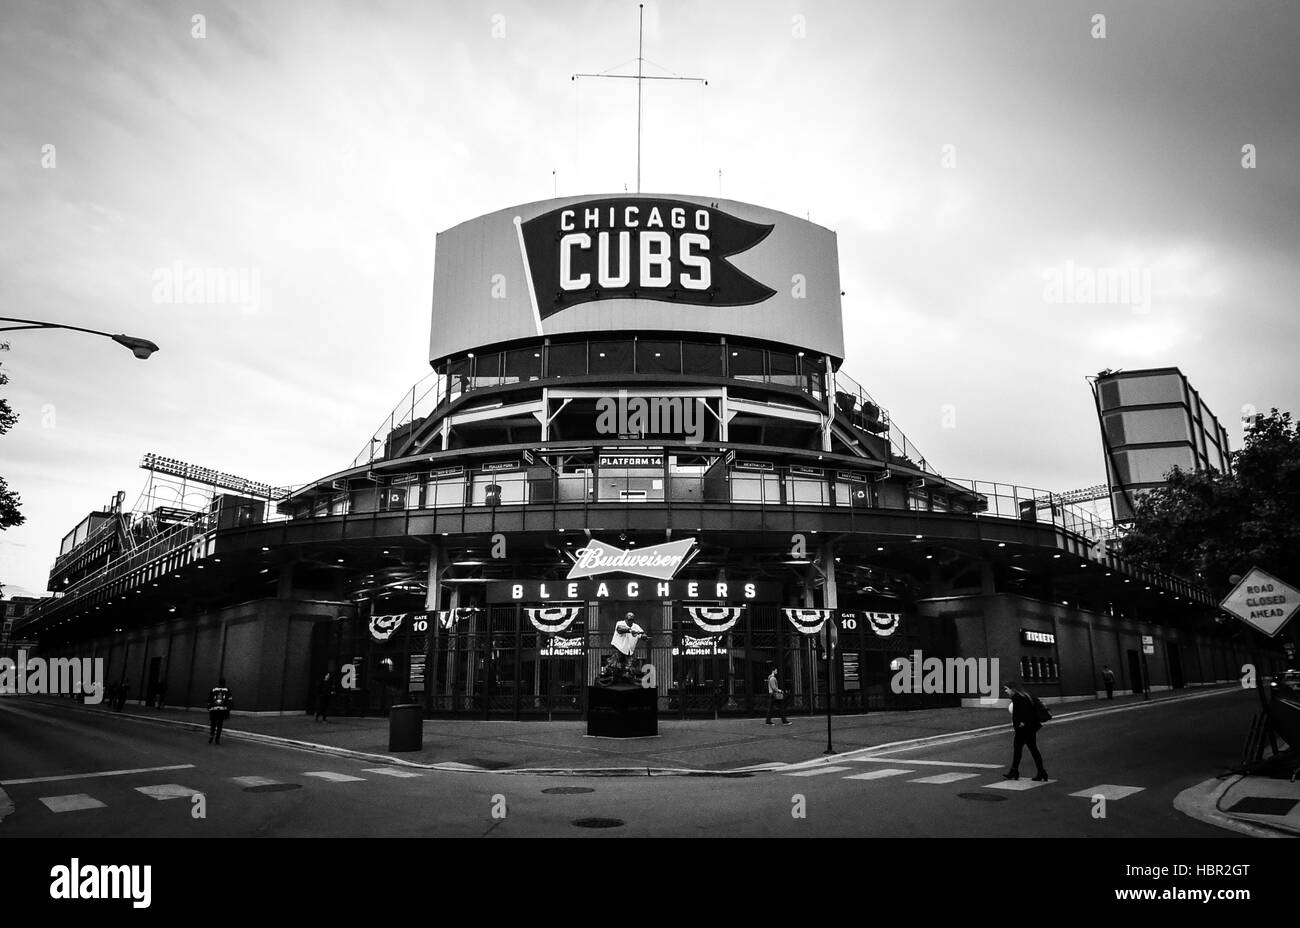 Bleachers entrance. Wrigley Field is a baseball park located on the North Side of Chicago, Illinois. It is the home of the Chicago Cubs, one of the ci Stock Photo